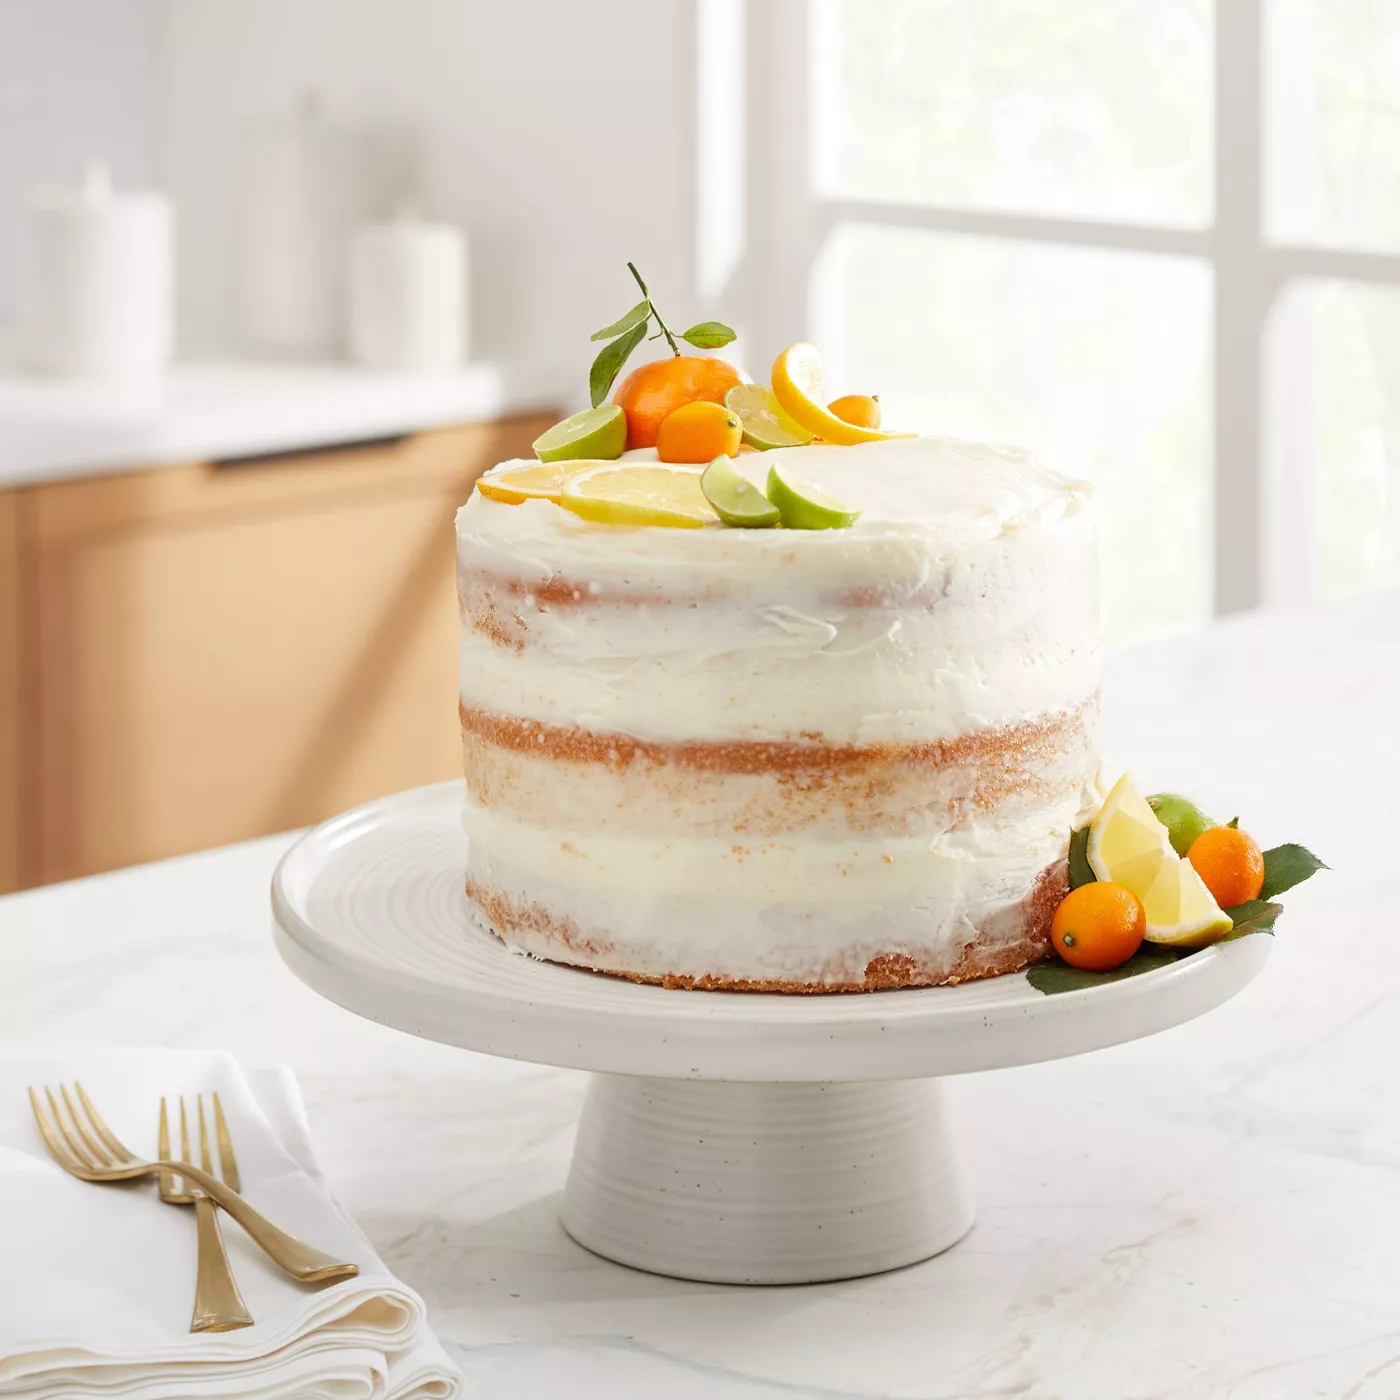 A citrus cake on a white cake stand in a home kitchen